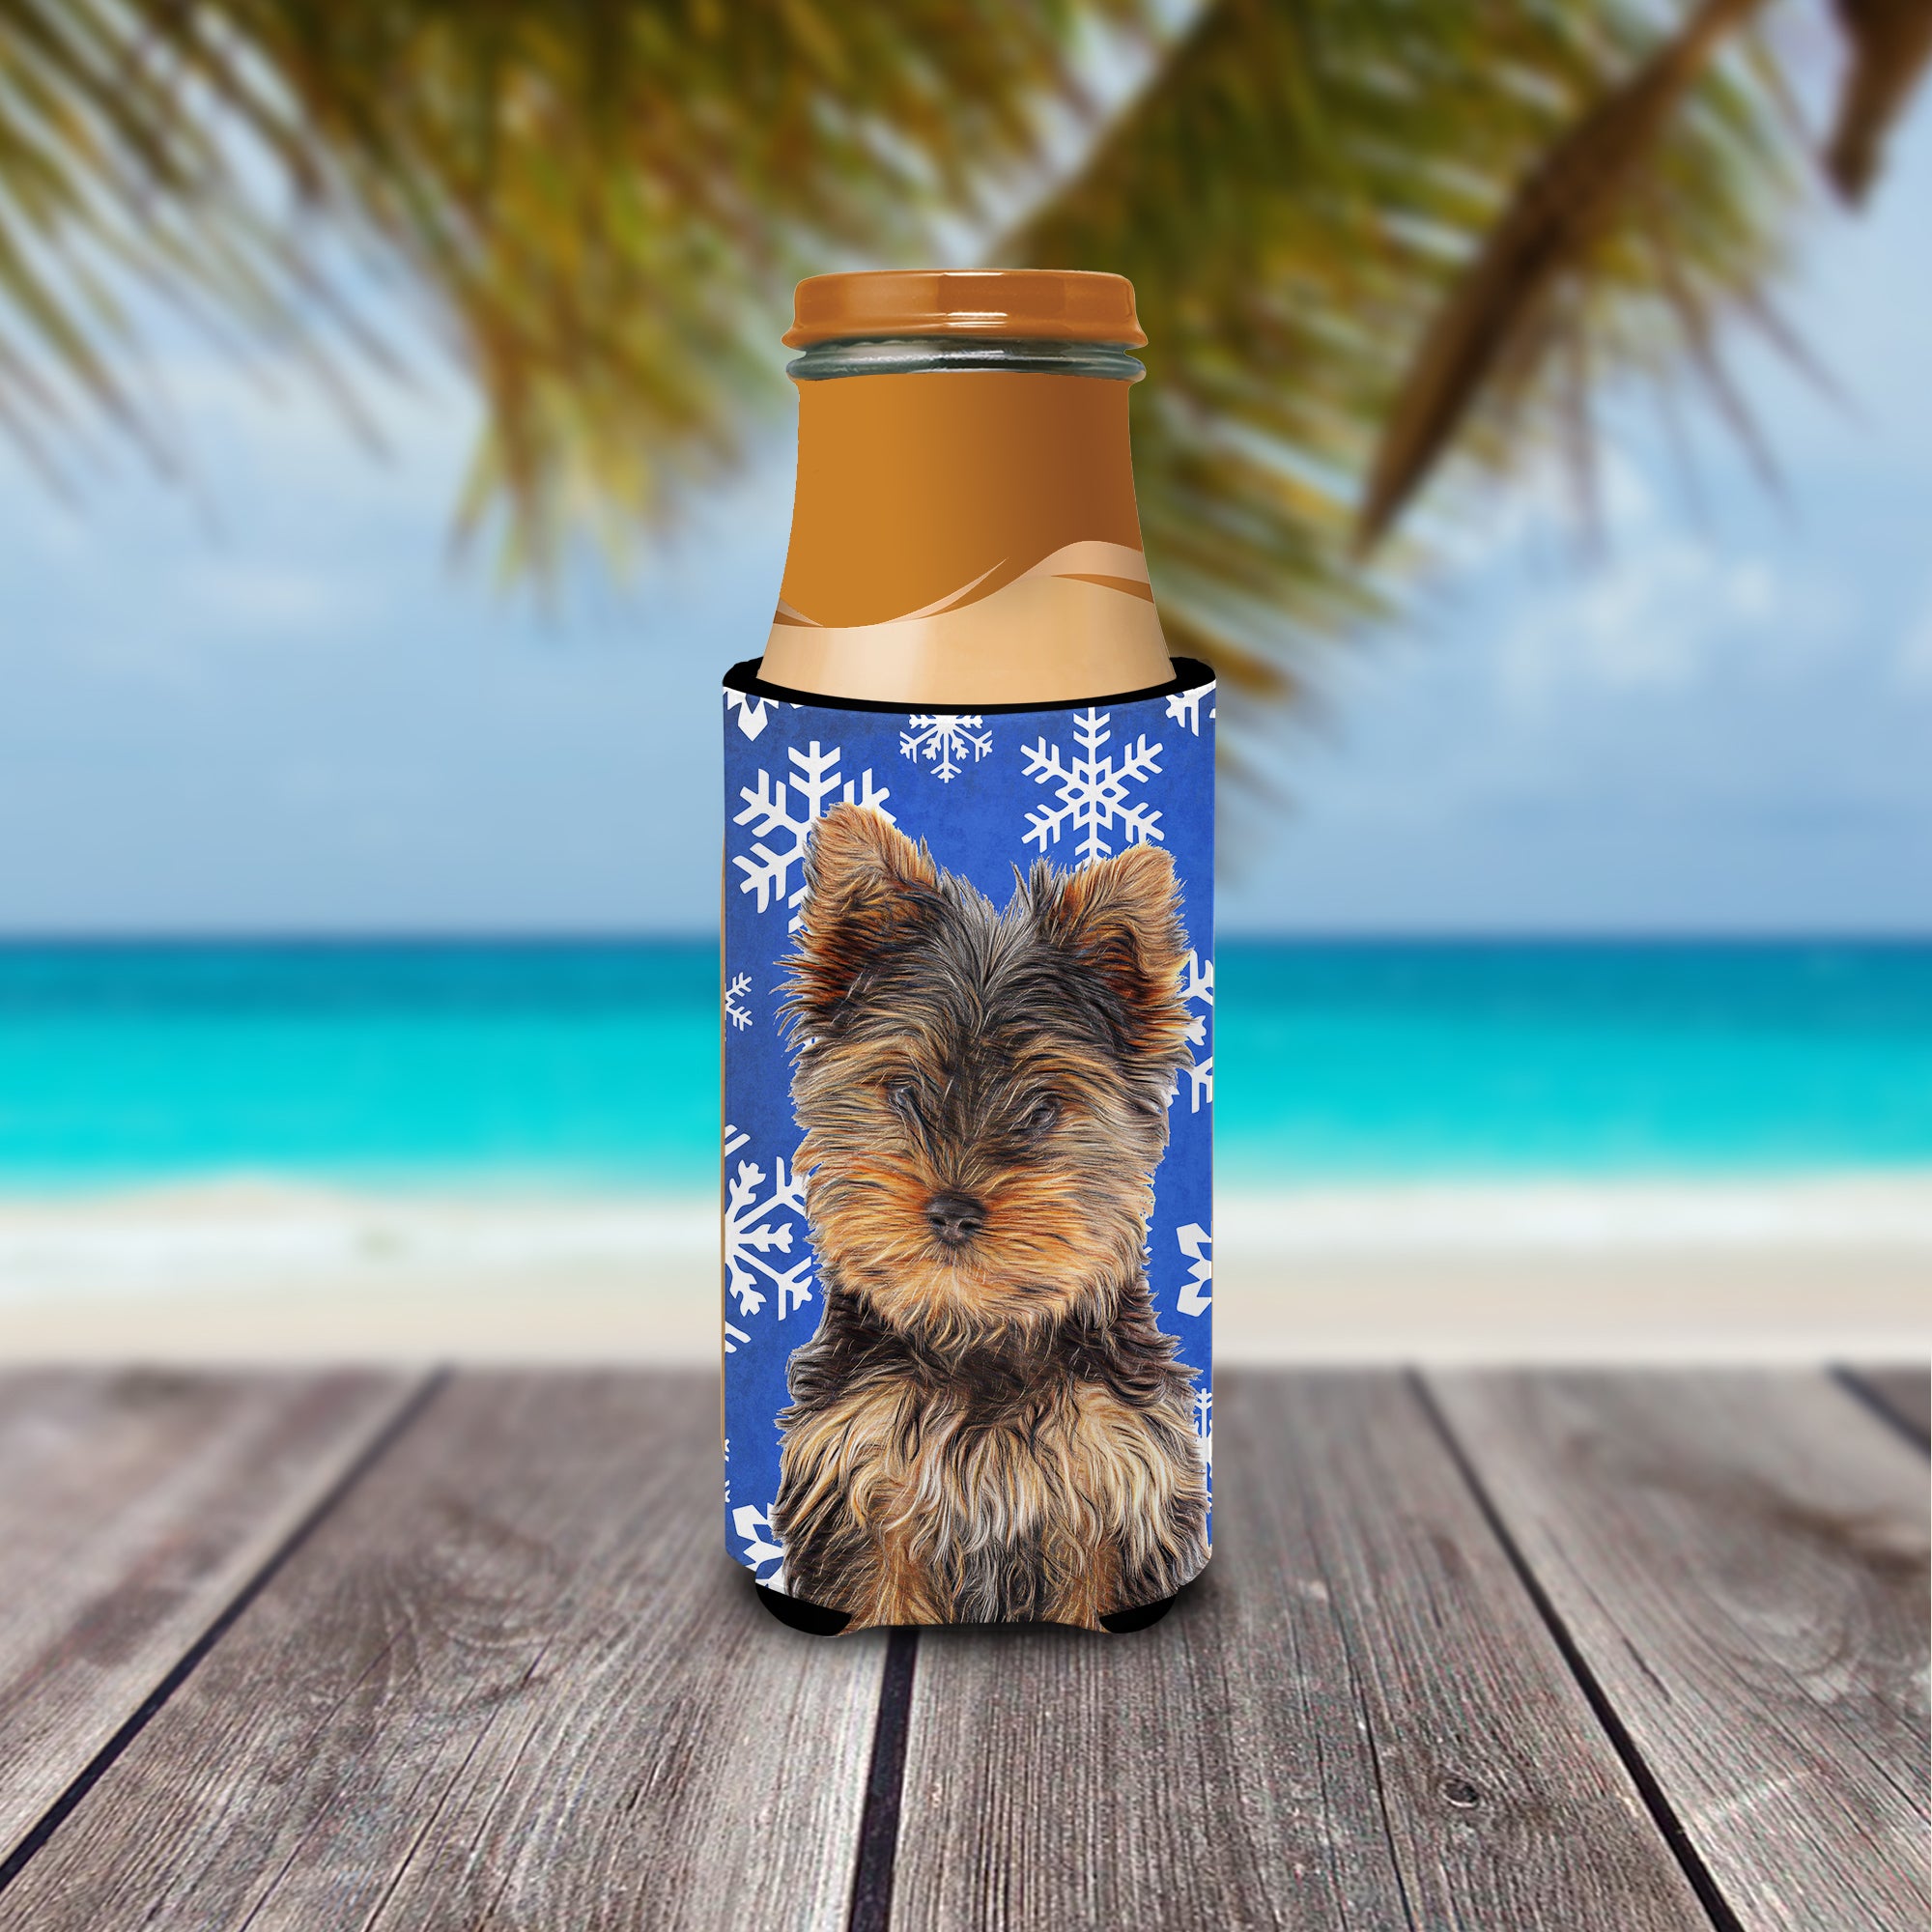 Winter Snowflakes Holiday Yorkie Puppy / Yorkshire Terrier Ultra Beverage Insulators for slim cans KJ1181MUK